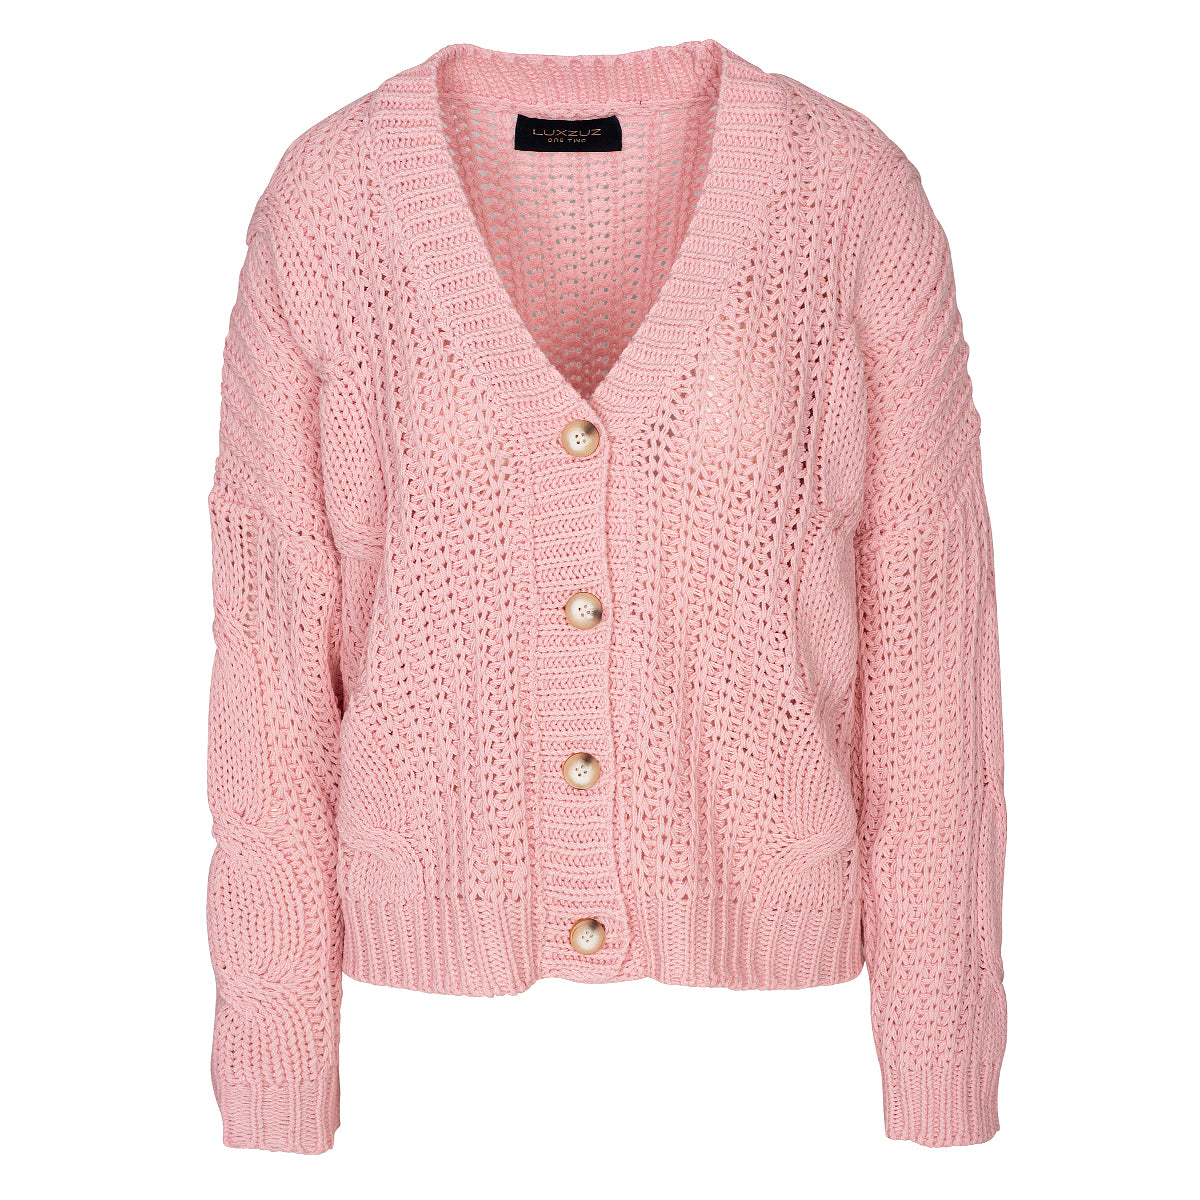 LUXZUZ // ONE TWO Signi Knit Knit 314 Rose Shadow